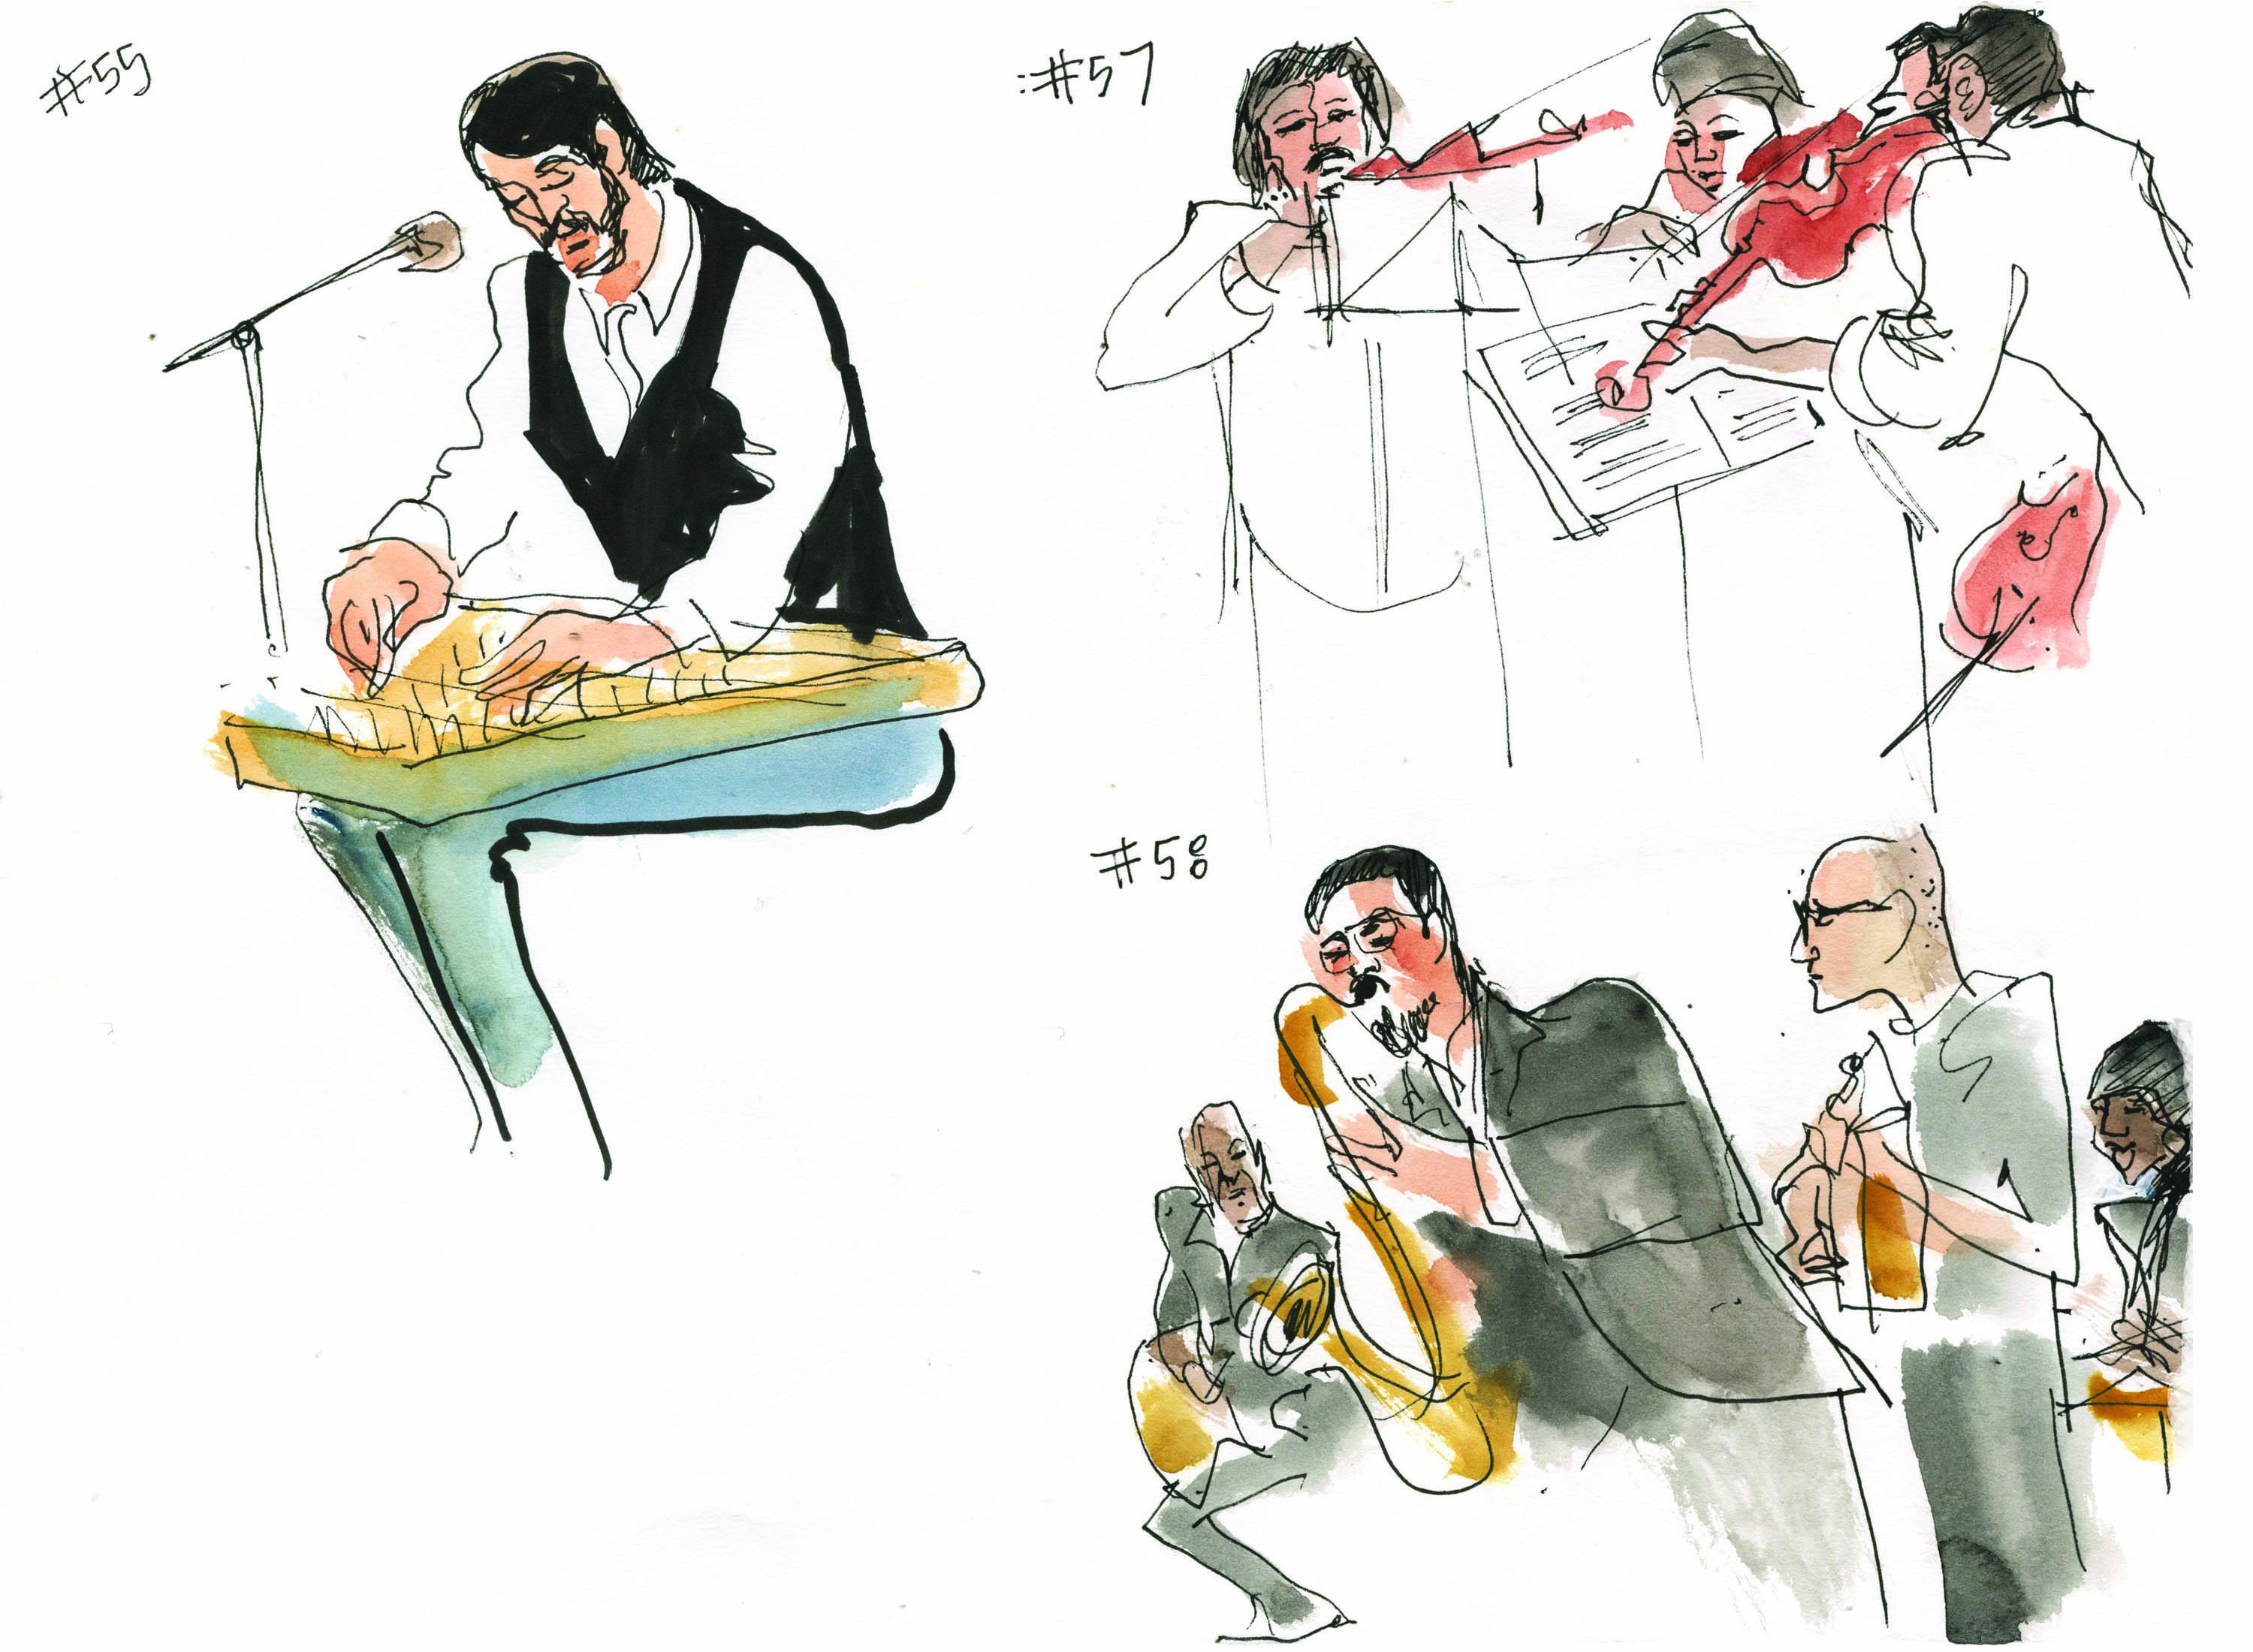 Sketches of musicians performing during MTA Arts & Design auditions at Grand Central Terminal by Joan Chiverton